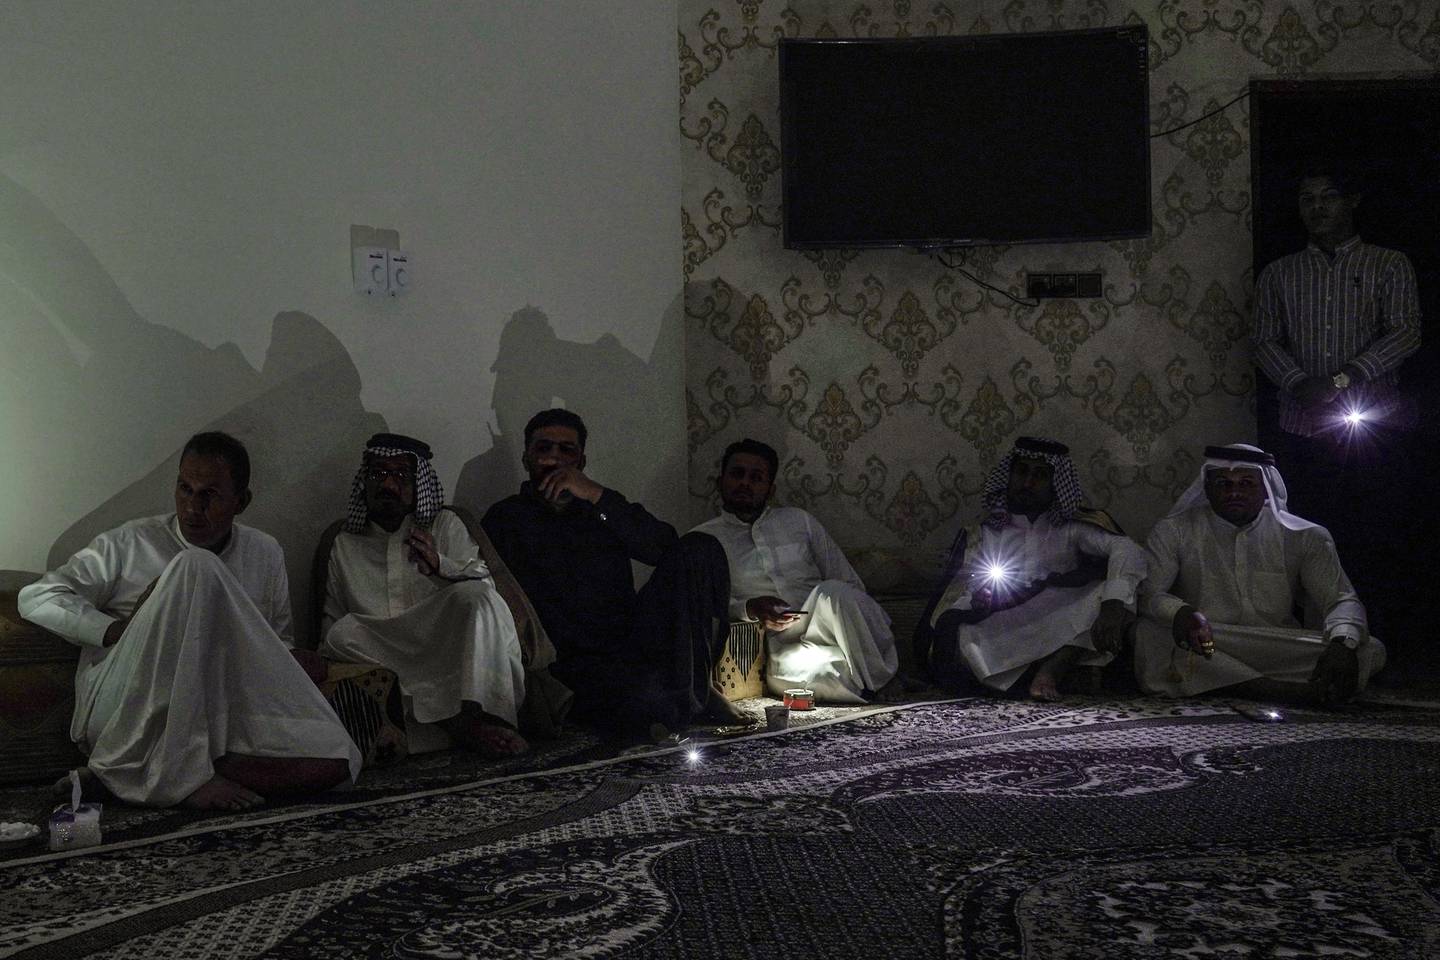 Residents of Nasiriyah attend a meeting with election candidate Alaa Al Rikabi during one of the frequent power cuts in the southern Iraqi city. Haider Husseini / The National                                                                       